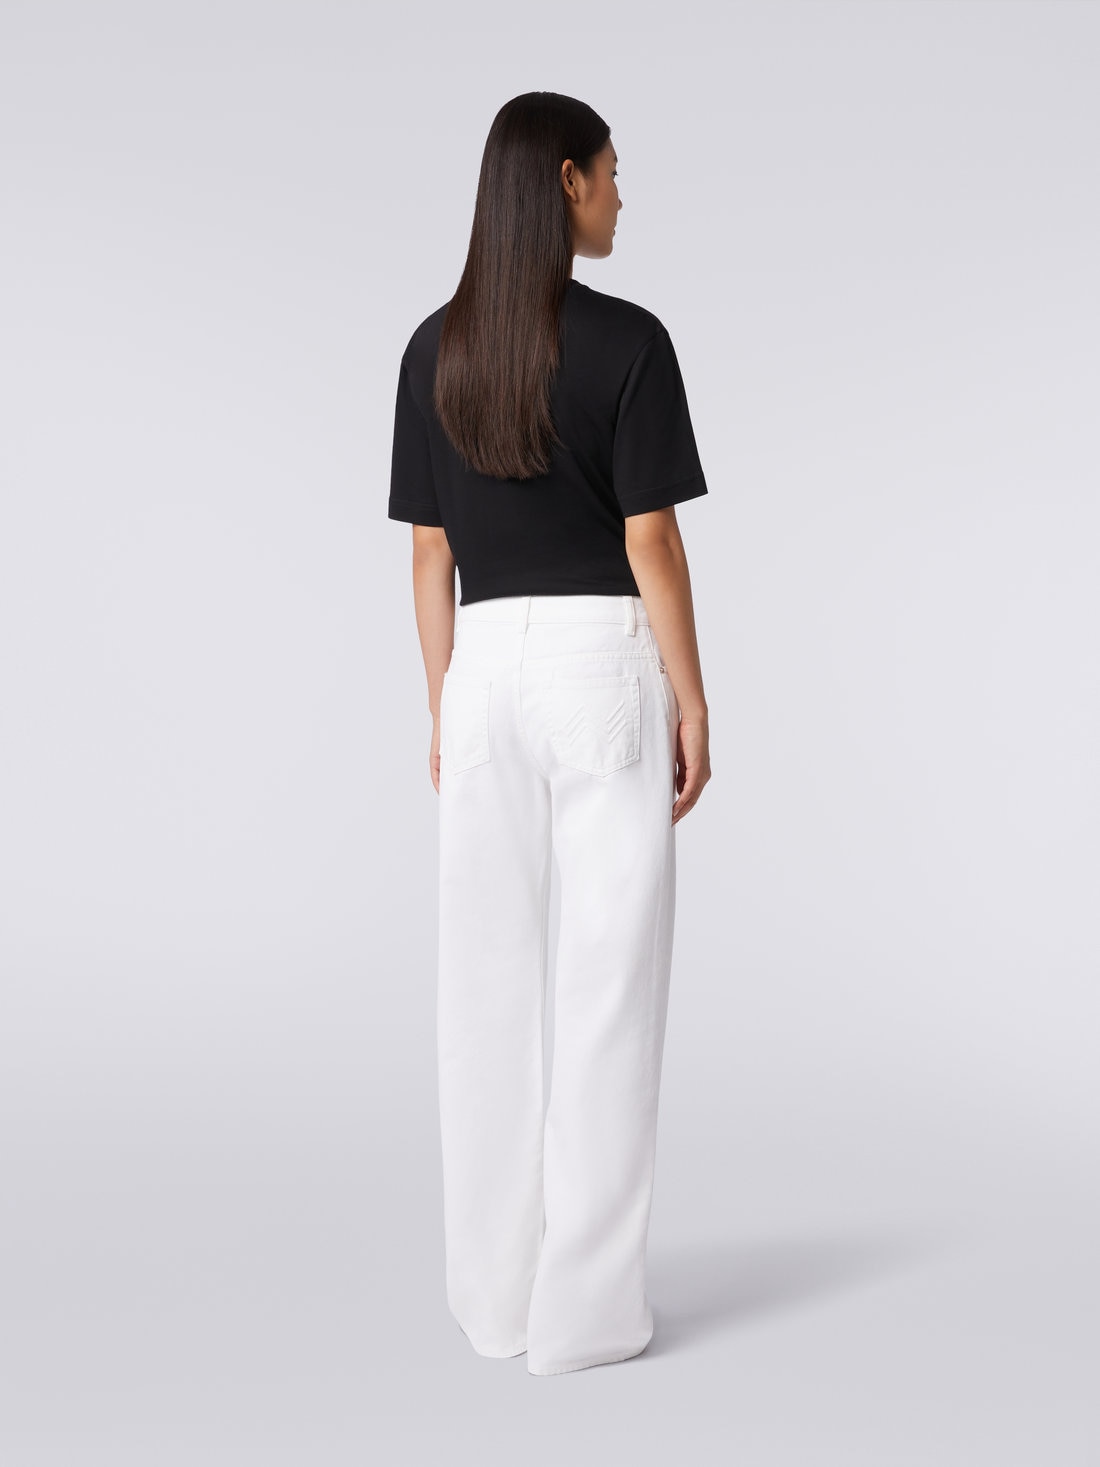 Five-pocket palazzo trousers with zigzag embroidery on the back pocket  , White  - DS23WI28BW00QES01AD - 3